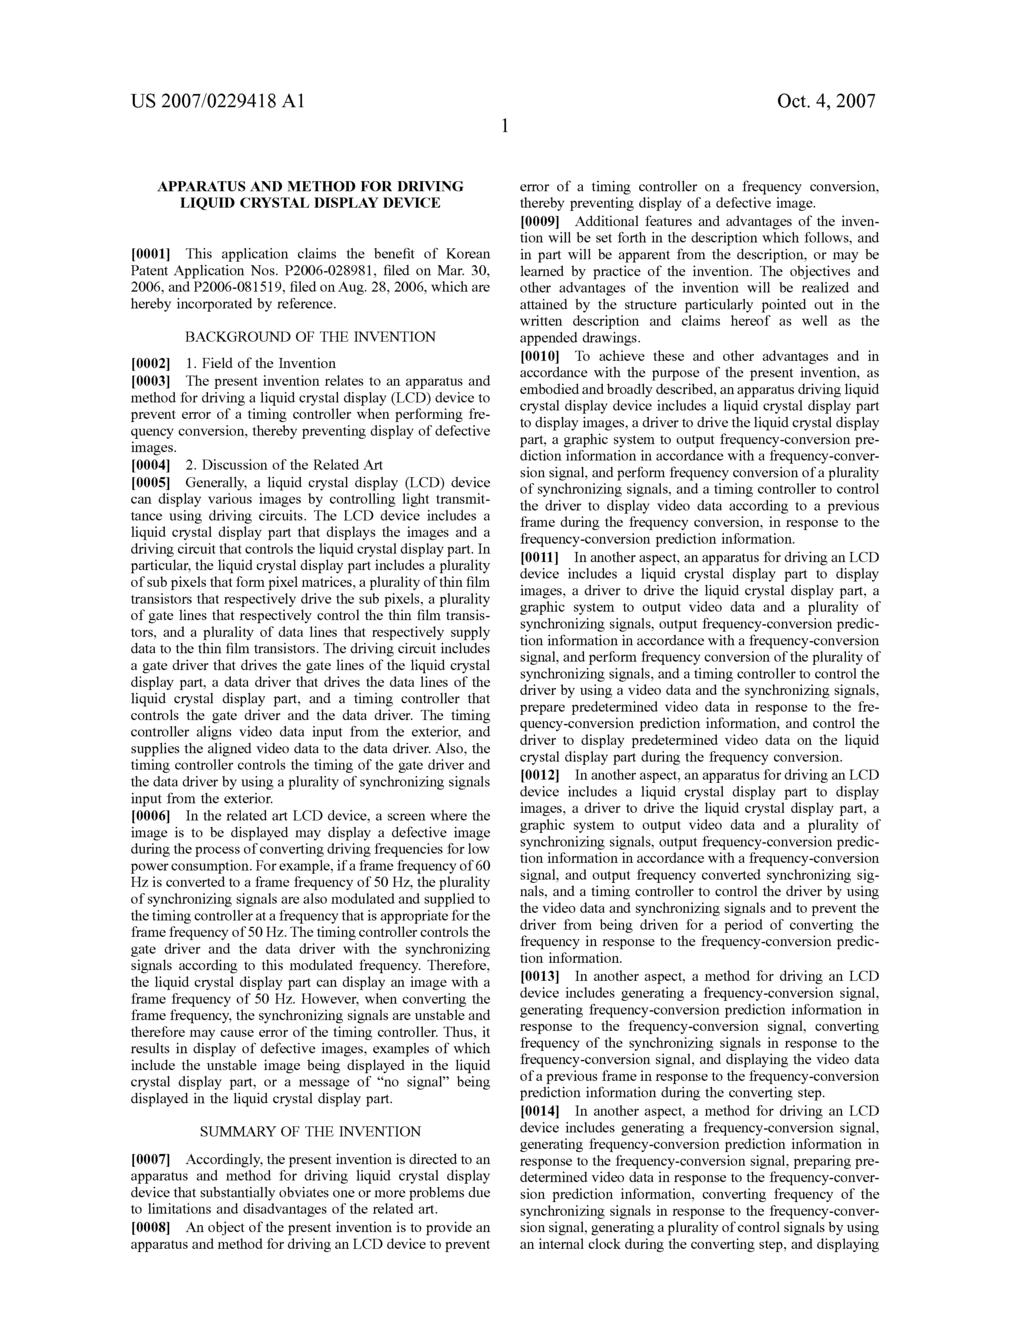 US 2007/0229418 A1 Oct. 4, 2007 APPARATUS AND METHOD FOR DRIVING LIQUID CRYSTAL DISPLAY DEVICE 0001. This application claims the benefit of Korean Patent Application Nos. P2006-028981, filed on Mar.